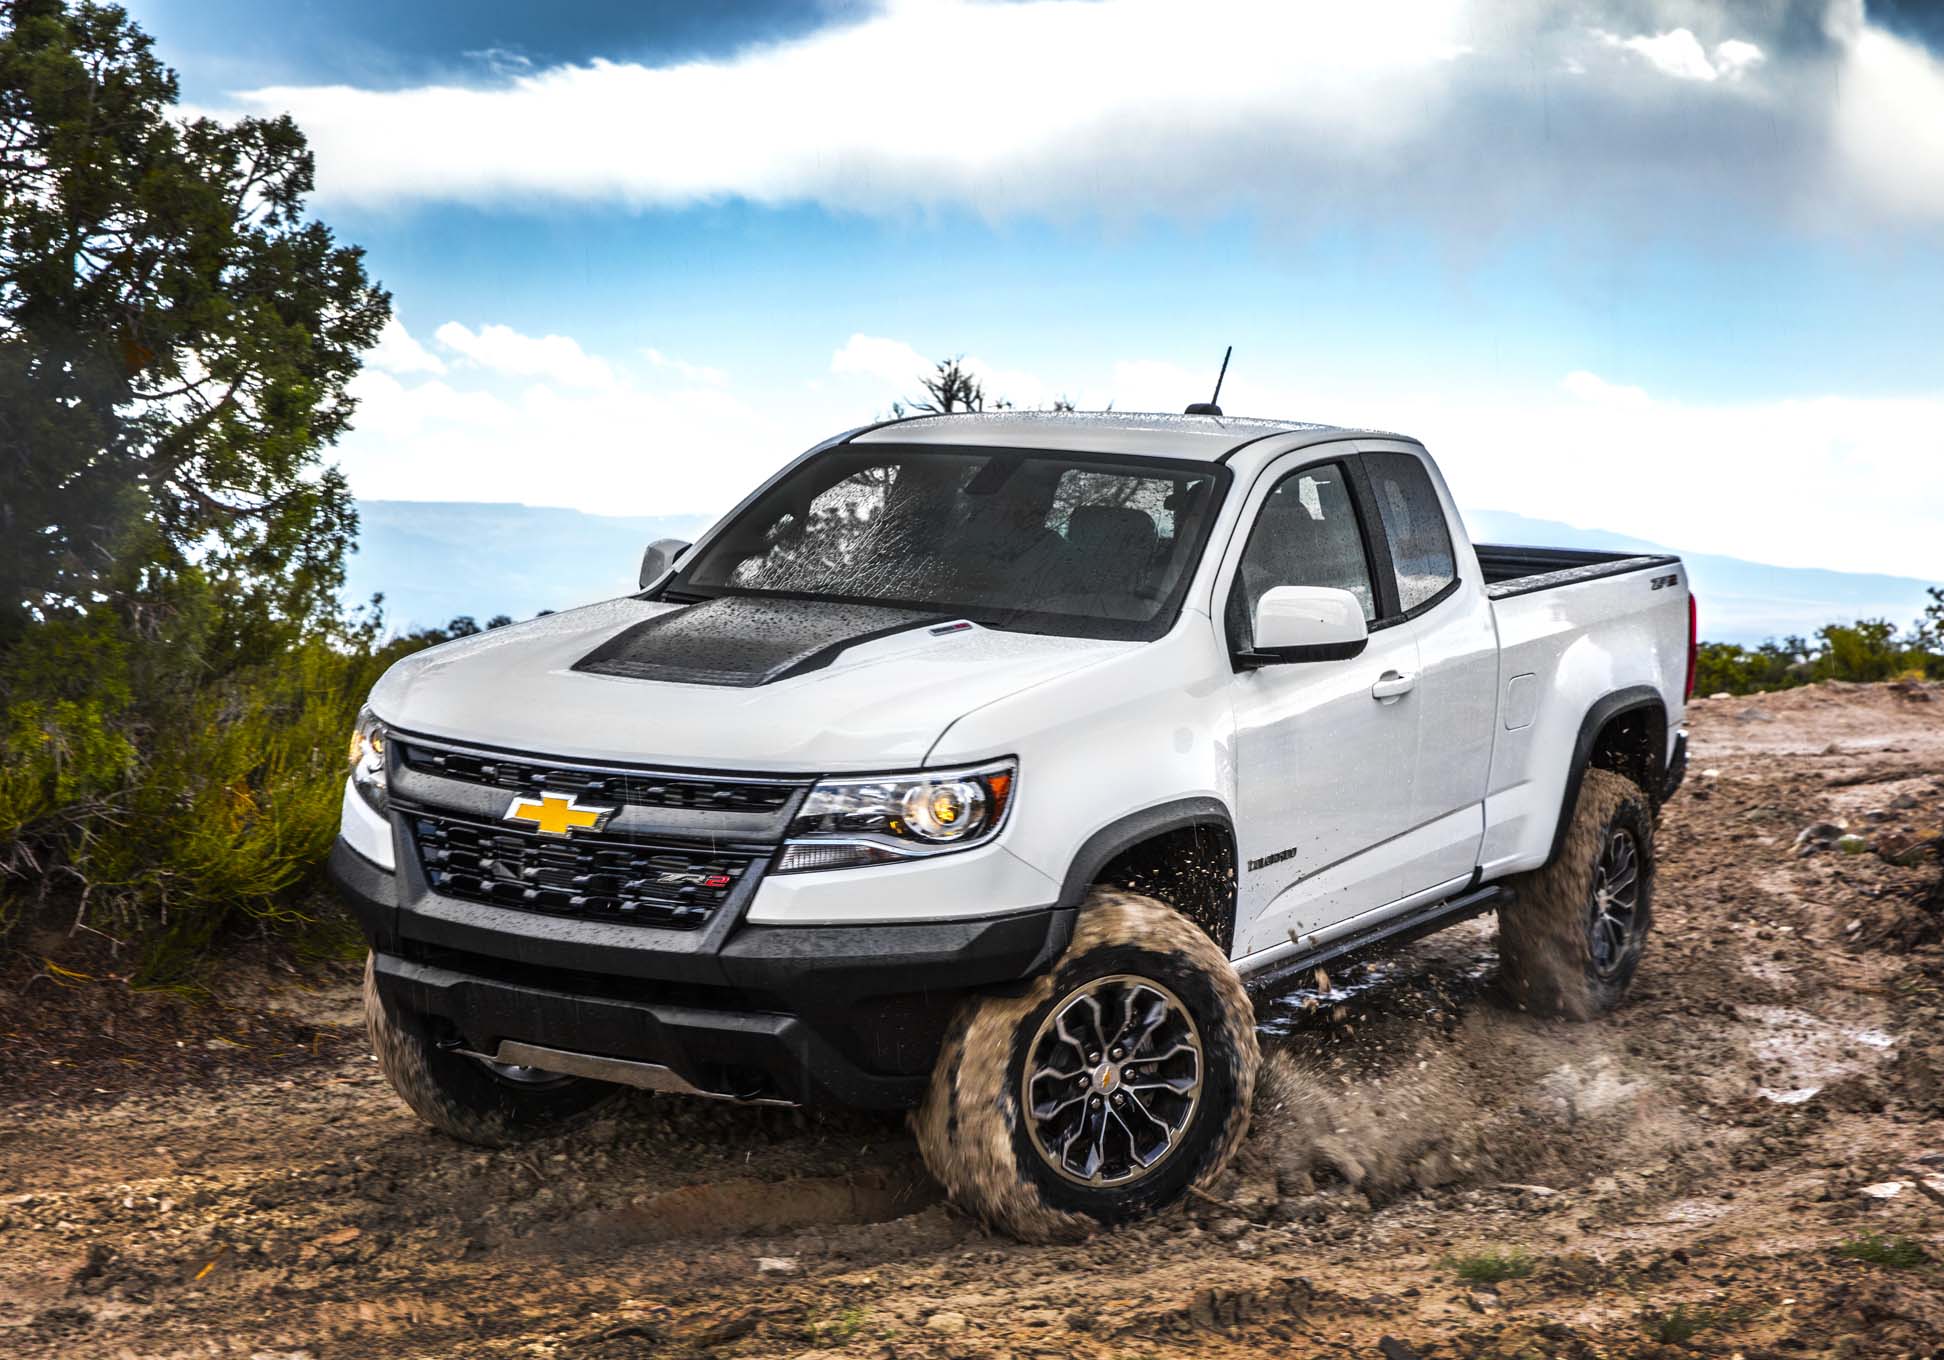 Best Off-road Cars